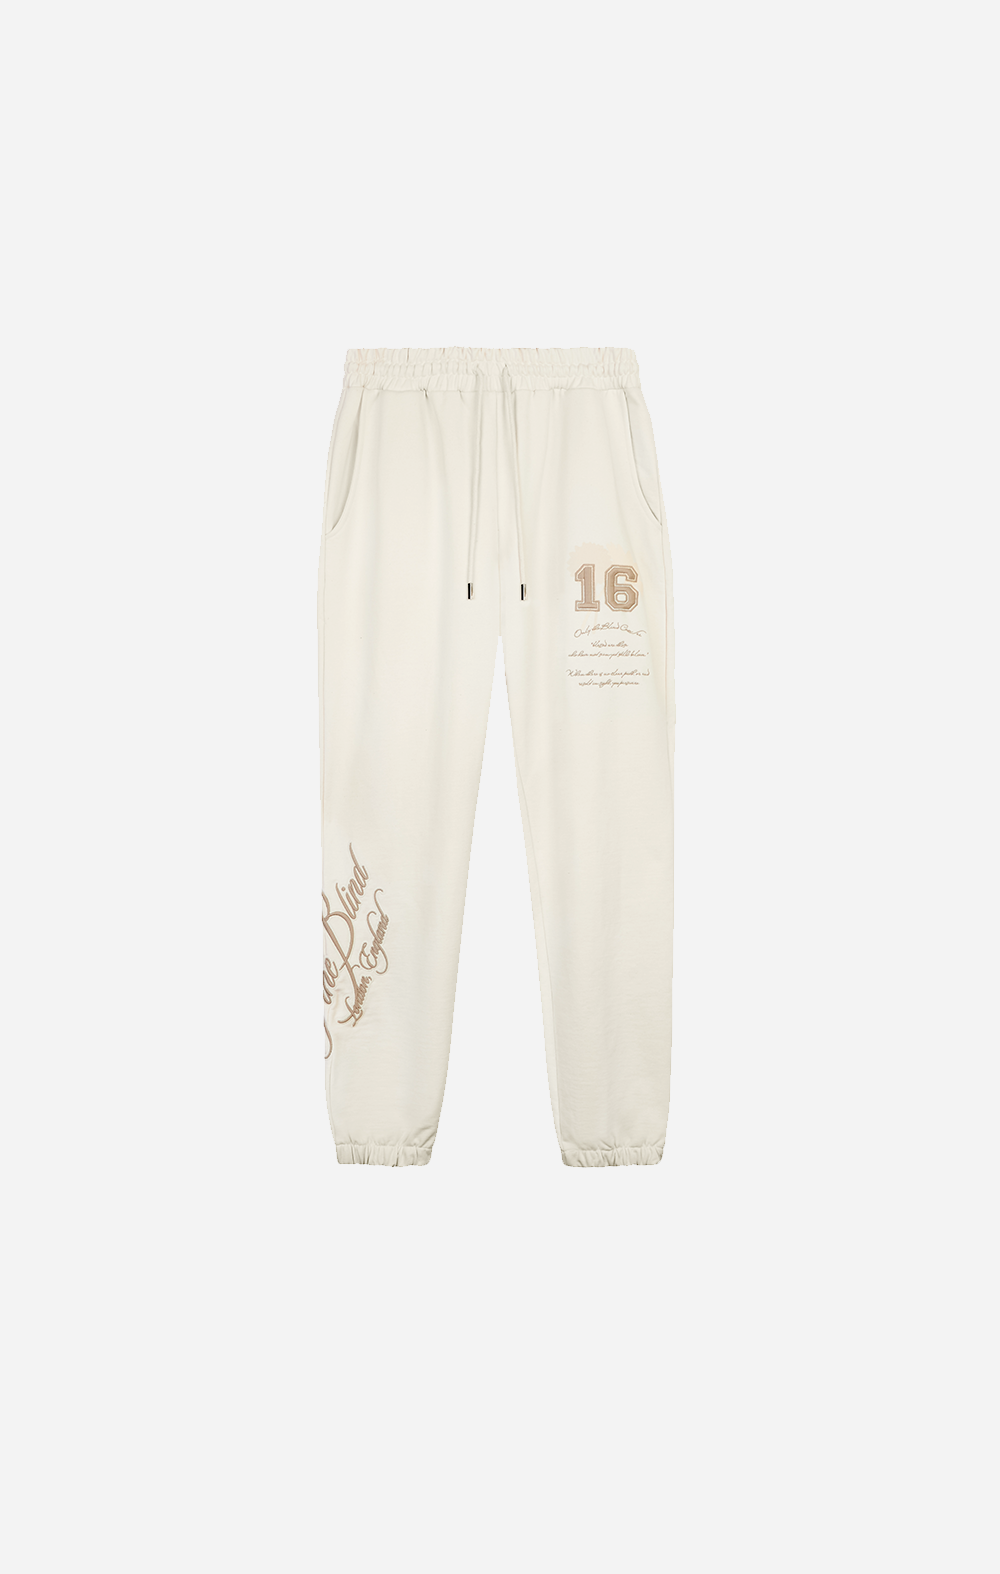 ONLY THE BLIND - Sand Varsity Sweatpants